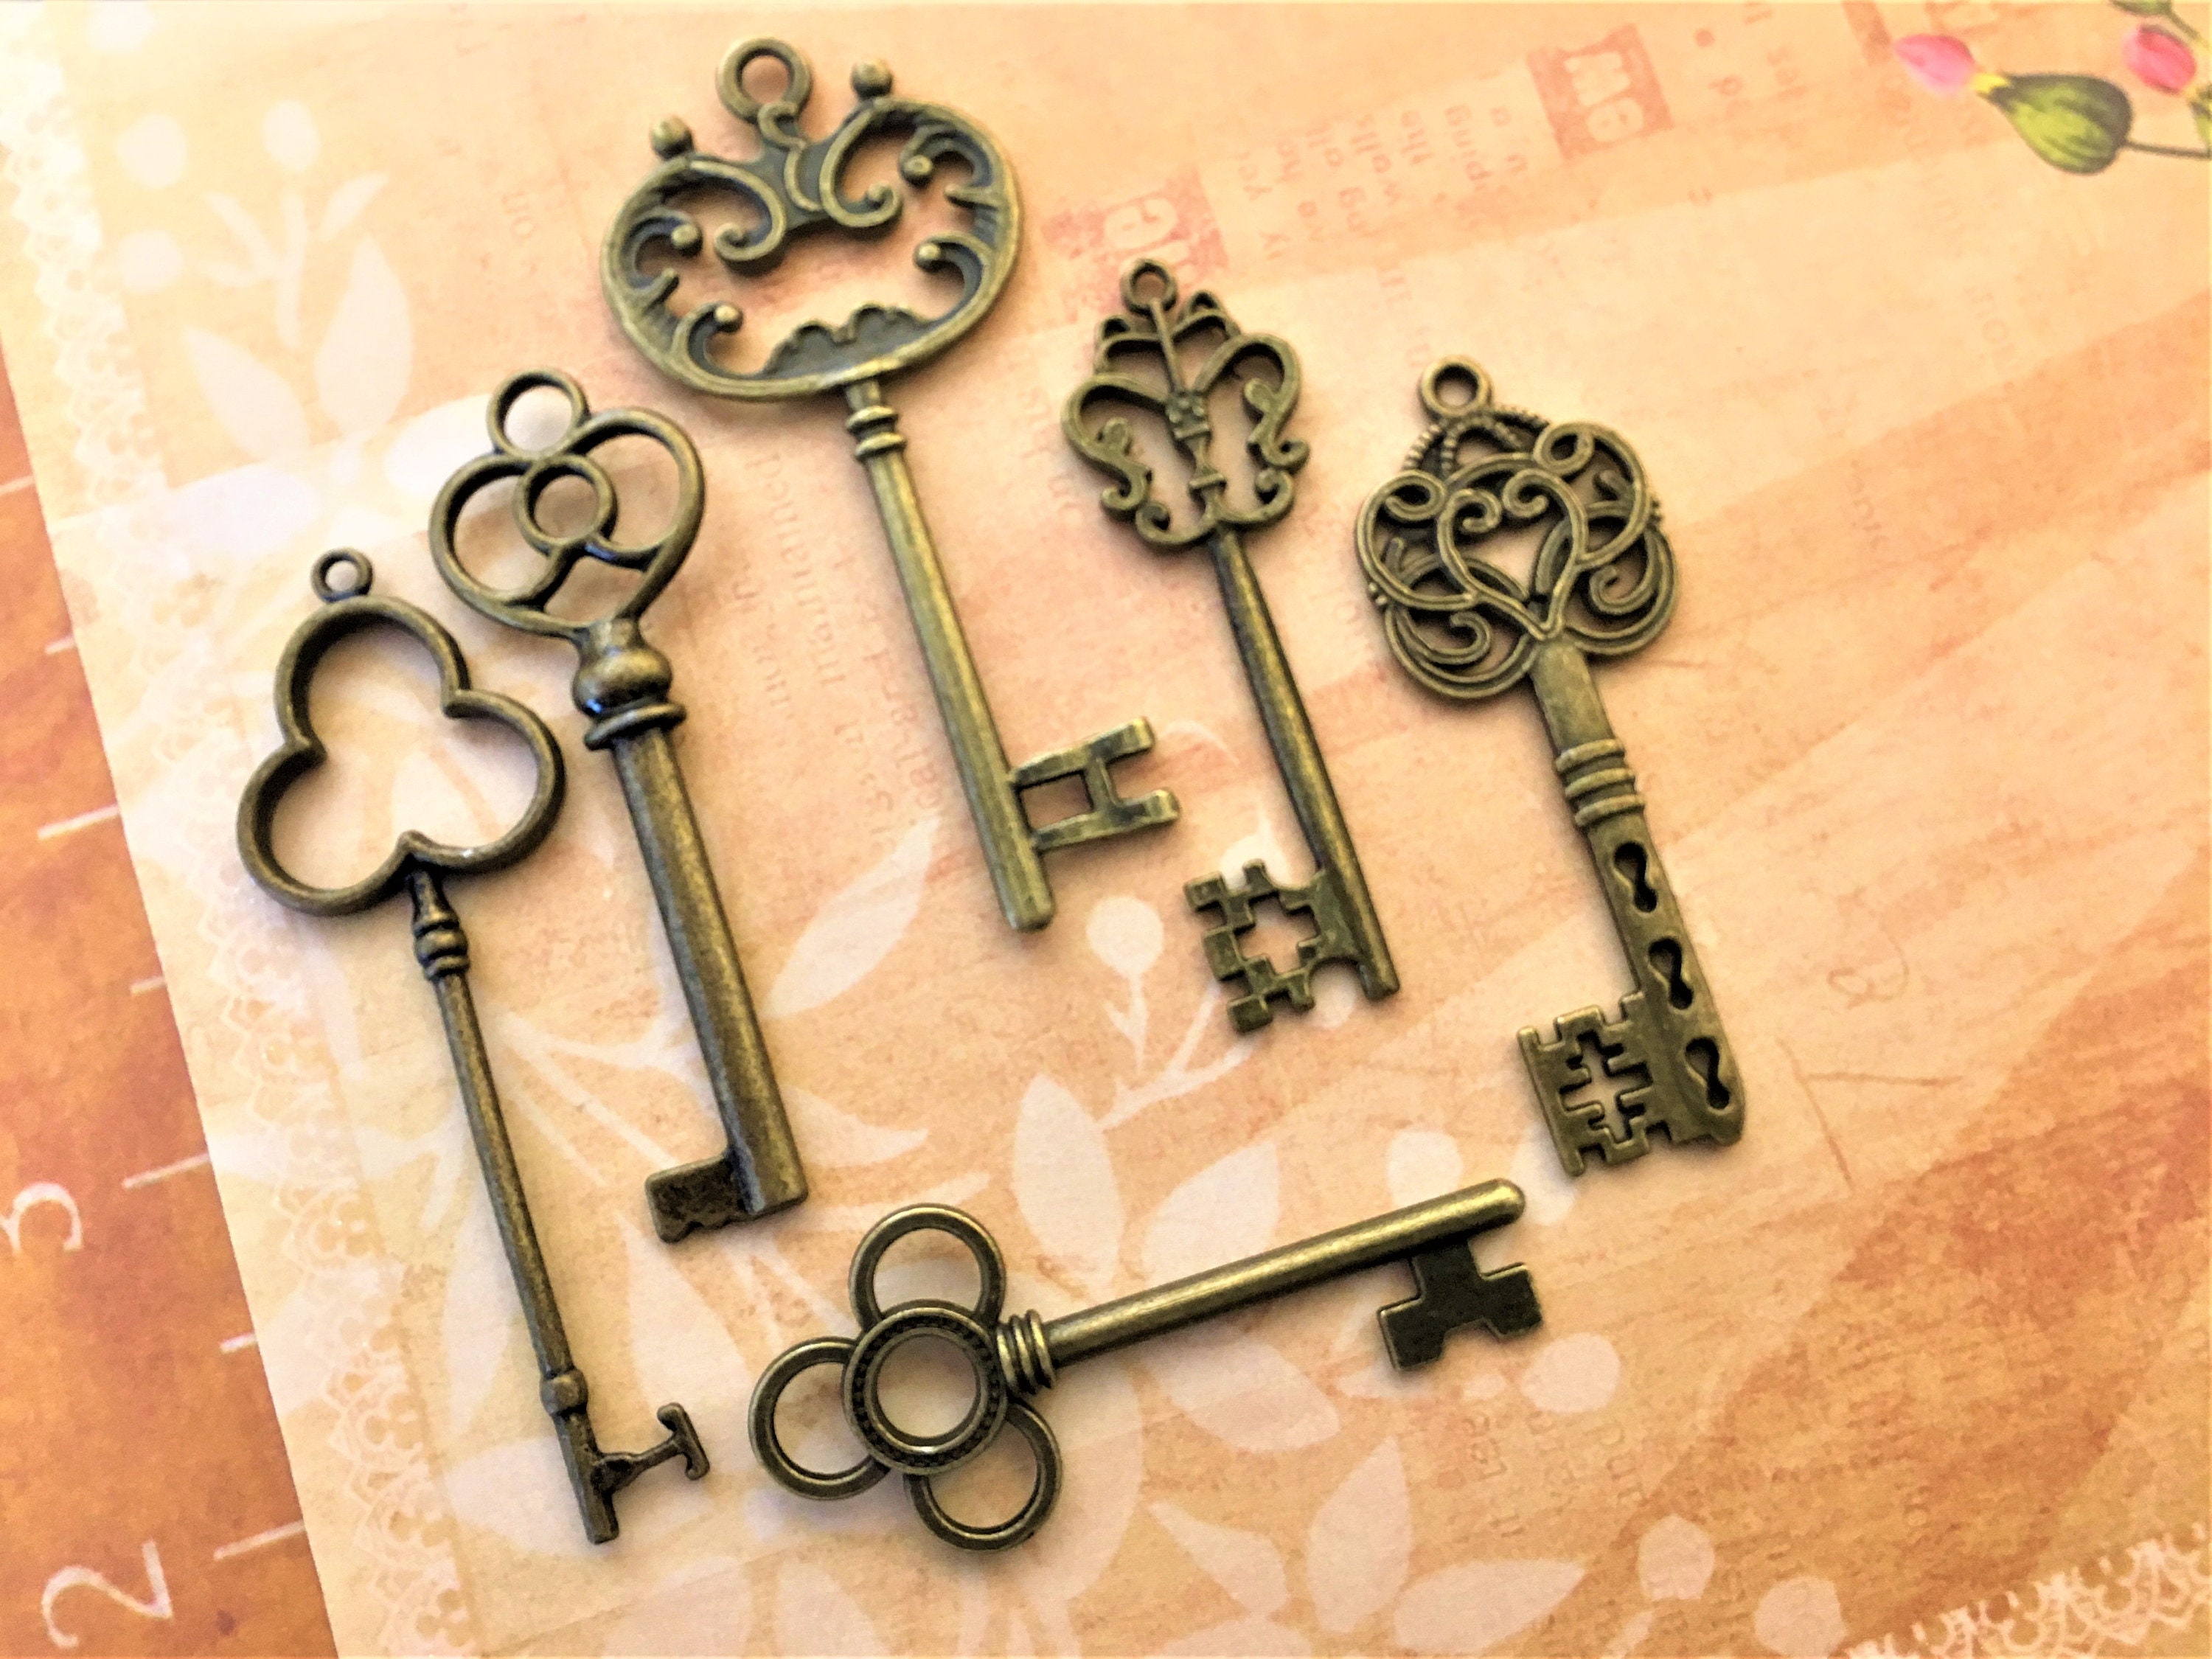 Replica Gold Silver & Brass Skeleton Keys Old Vintage Jewelry Antique Key  Wedding Invitation Announcement Paper Save Date Wholesale Crafts 